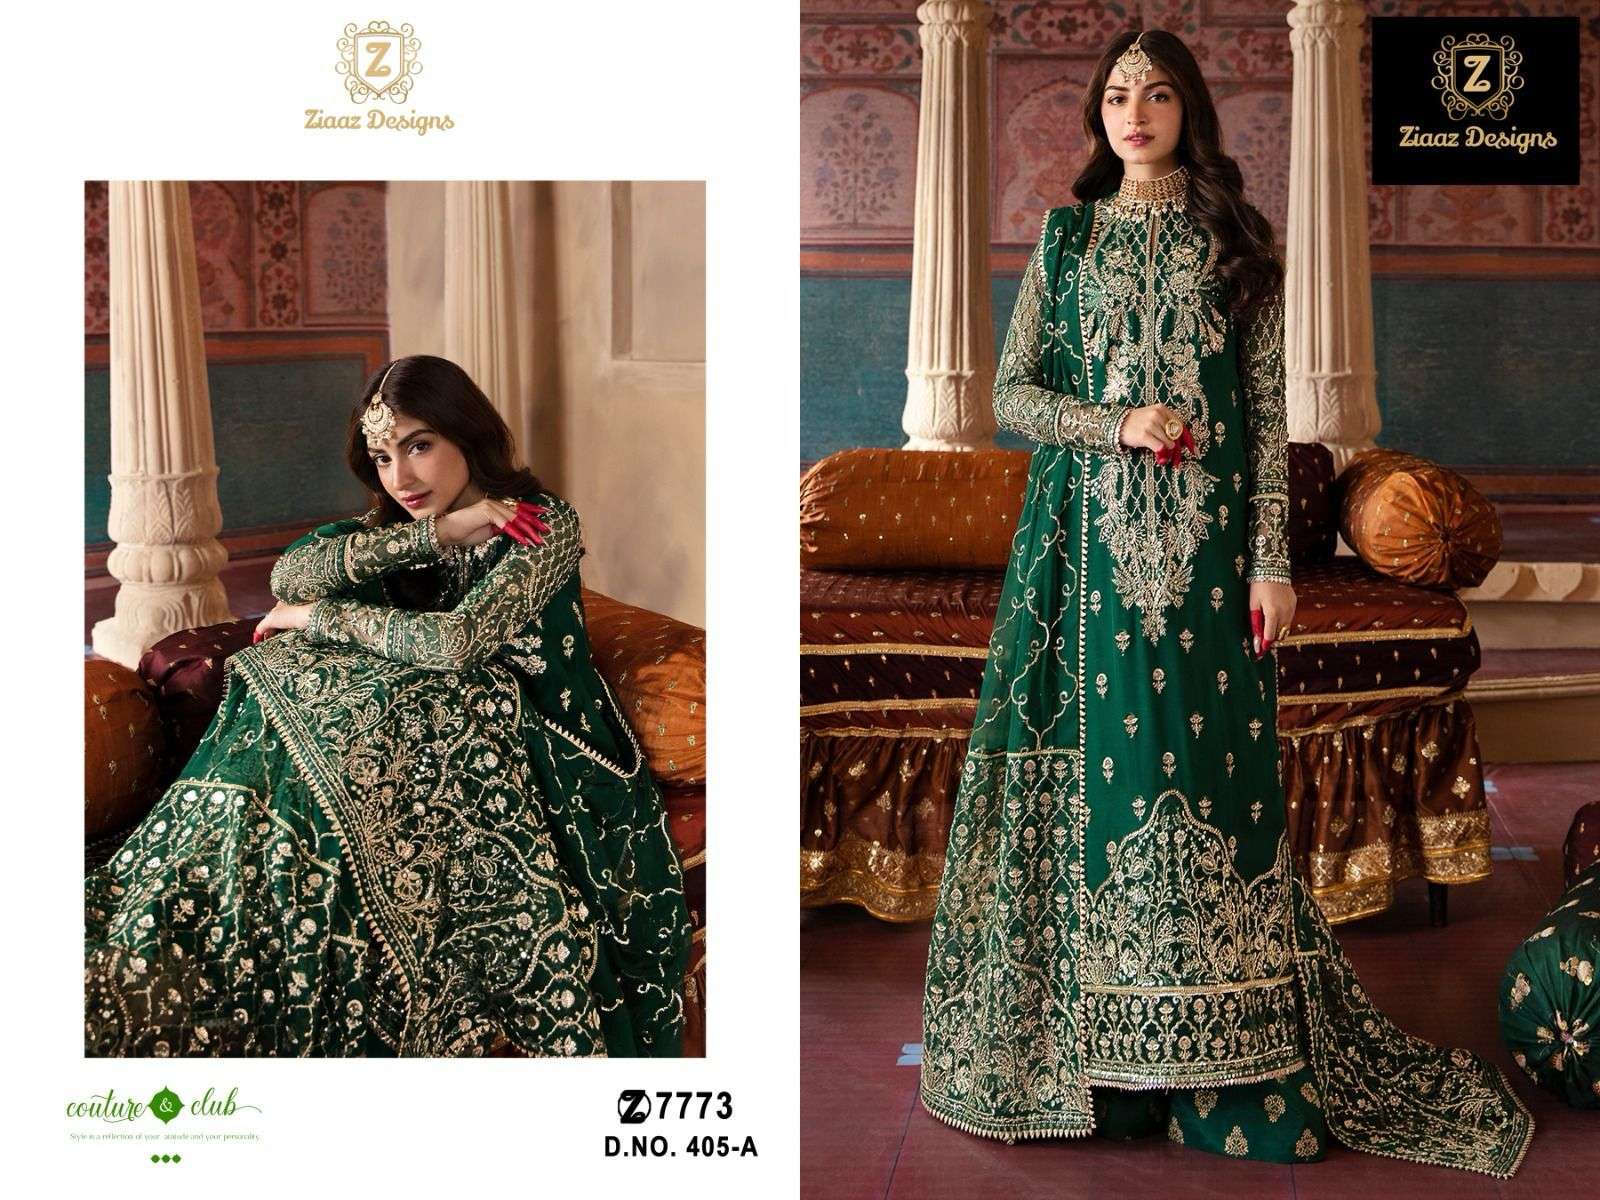 Ziaaz Designs 405 Georgette very heavy embroidered suit